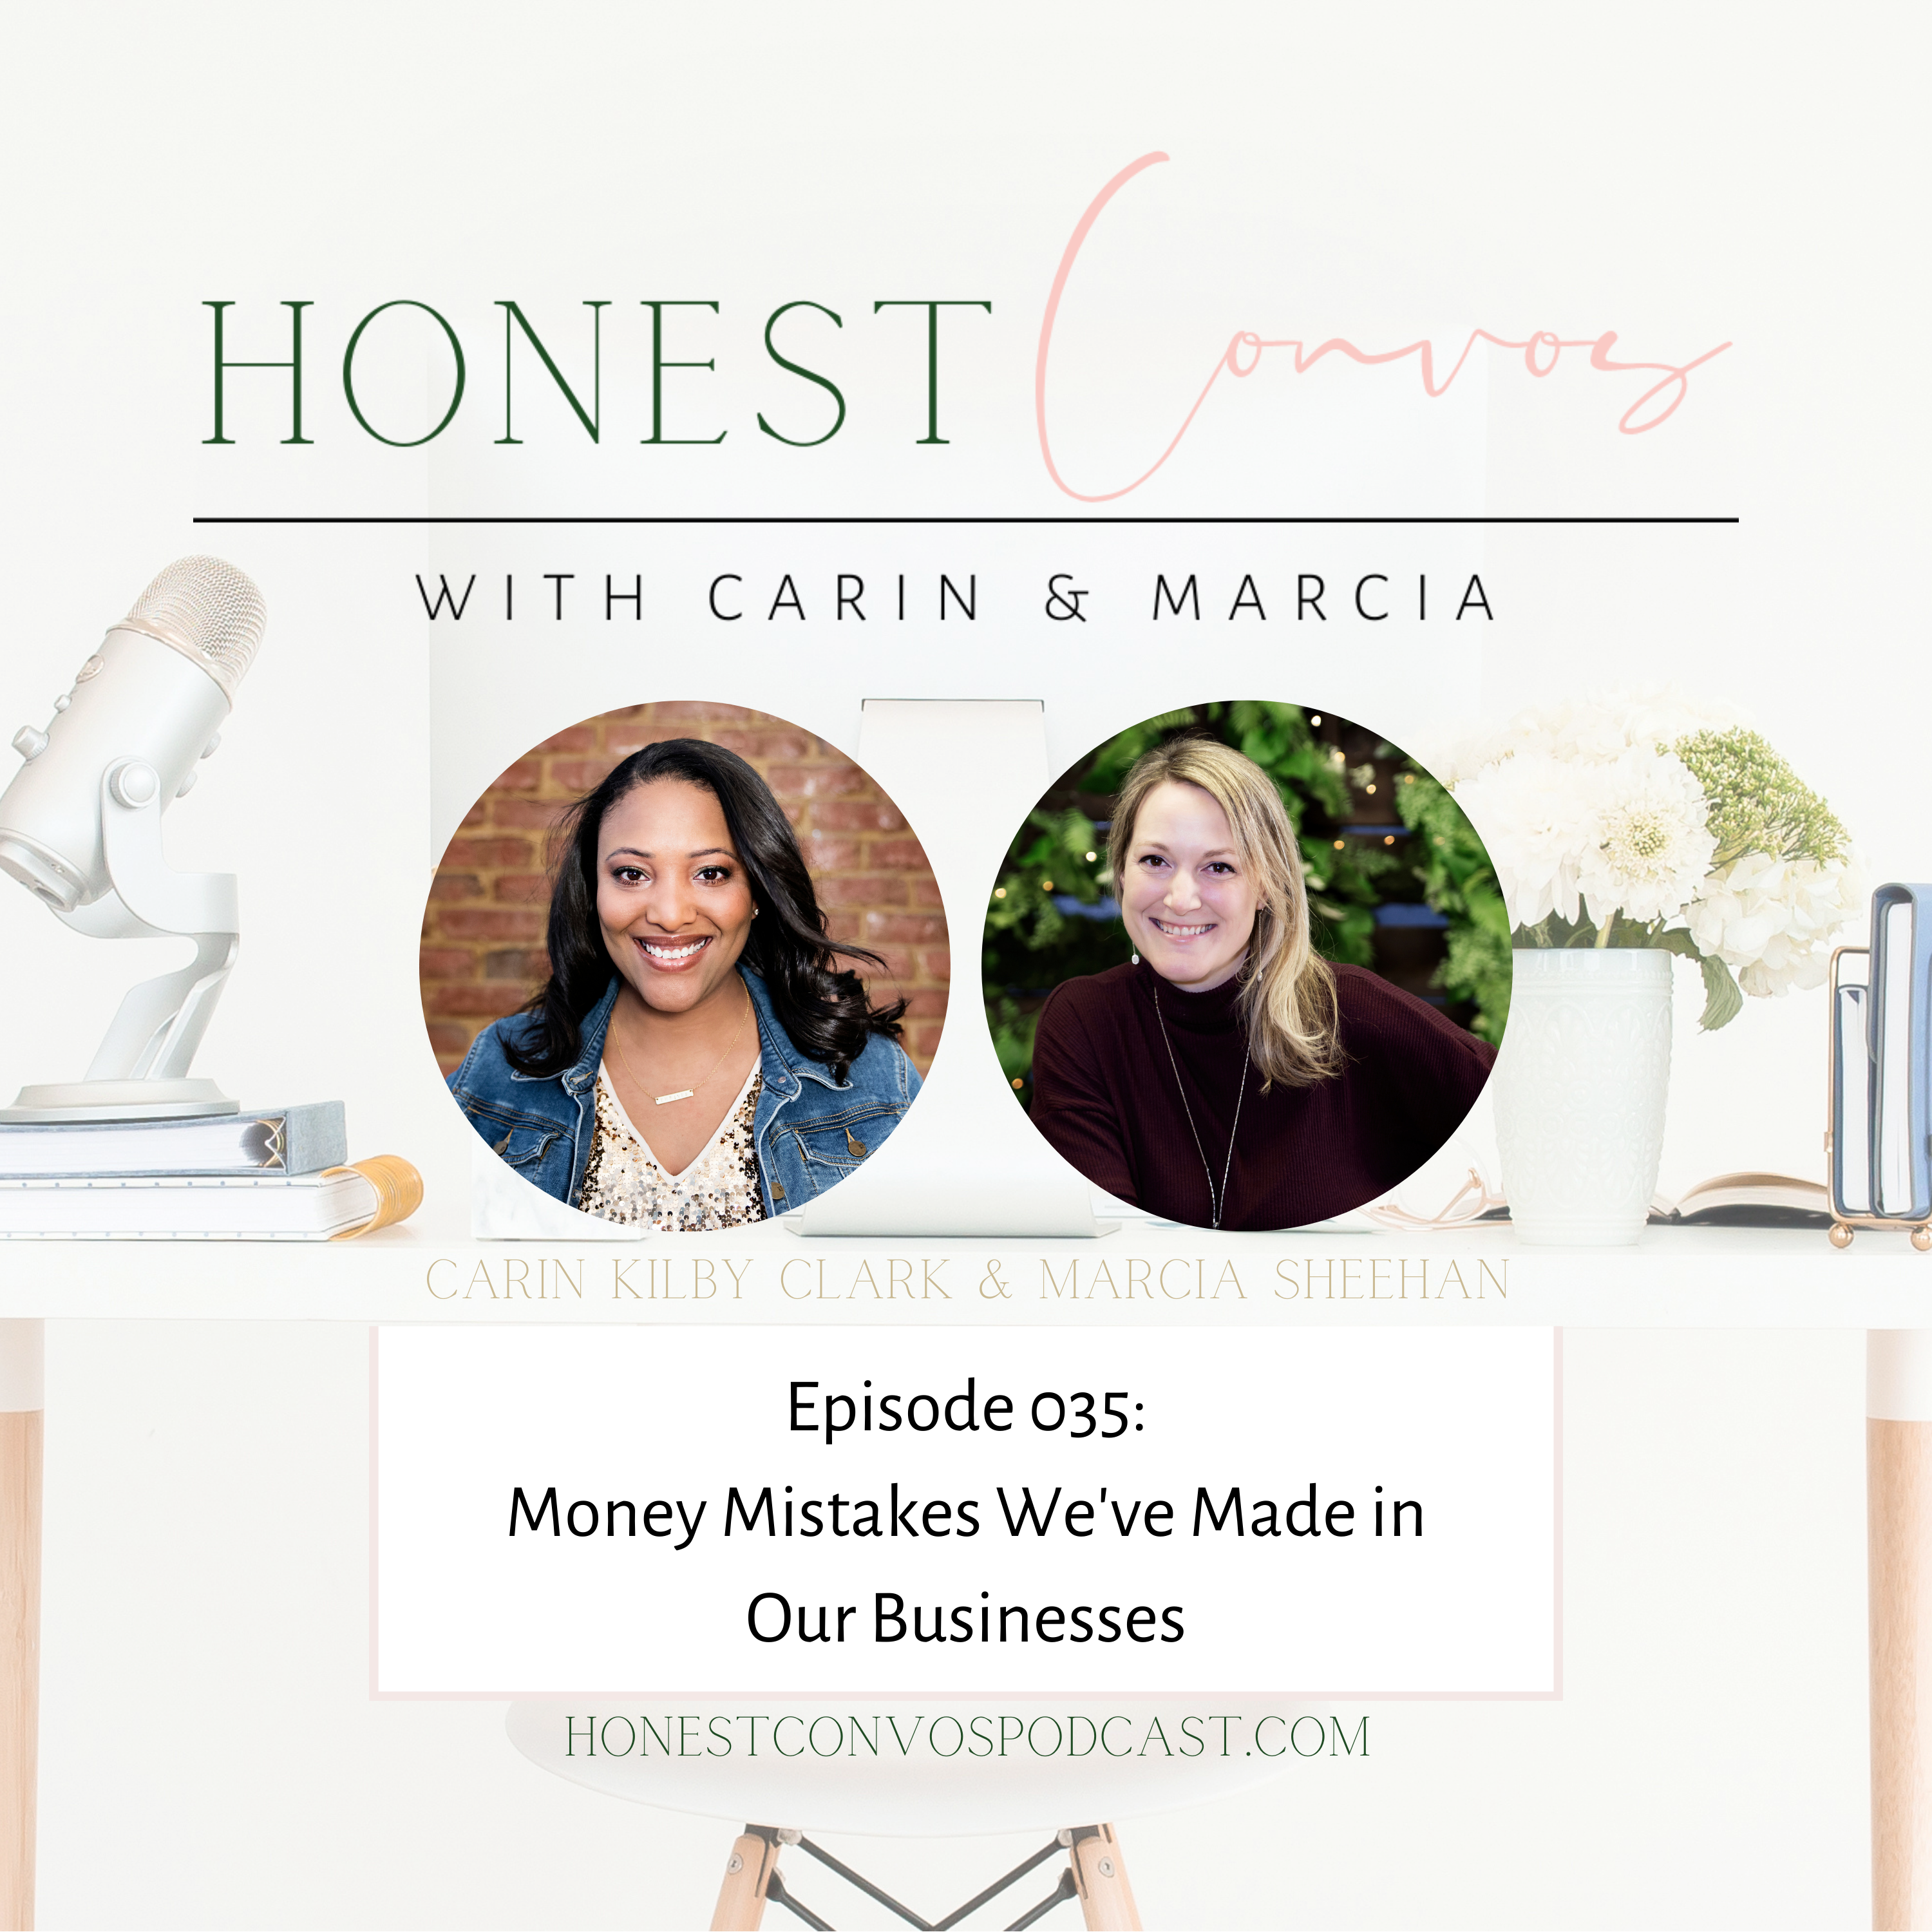 Money Mistakes We've Made in Our Businesses